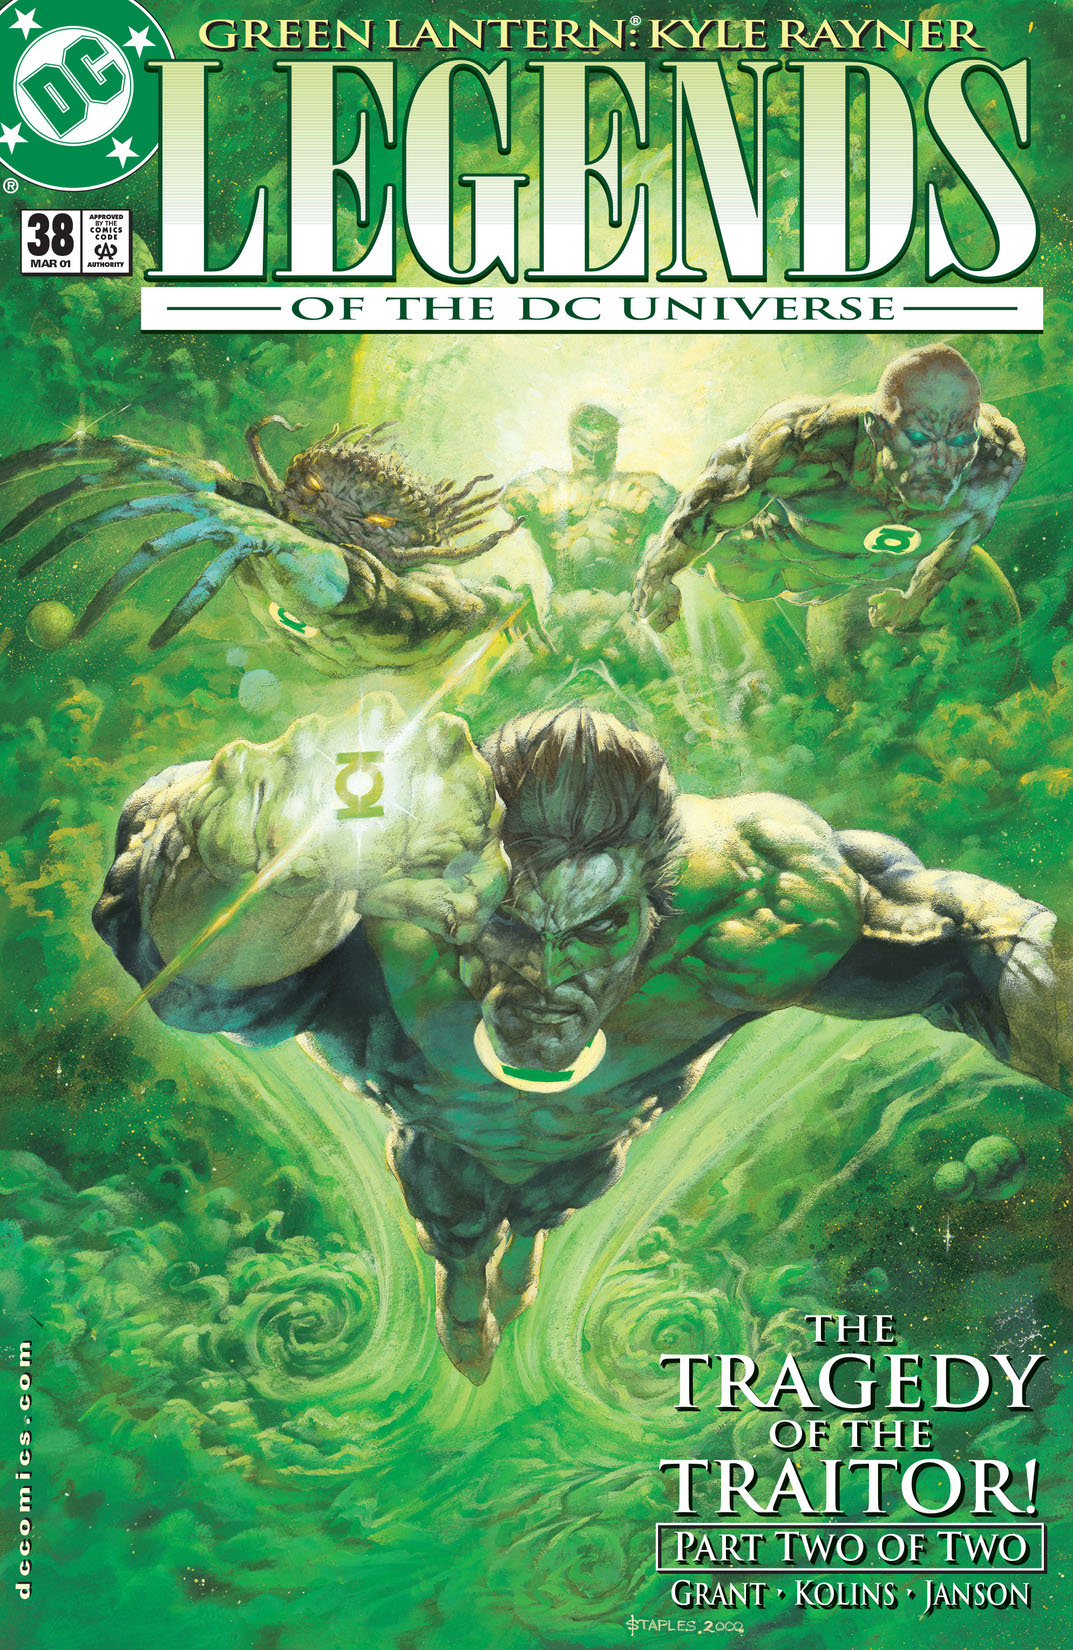 Legends of the DC Universe #38 preview images